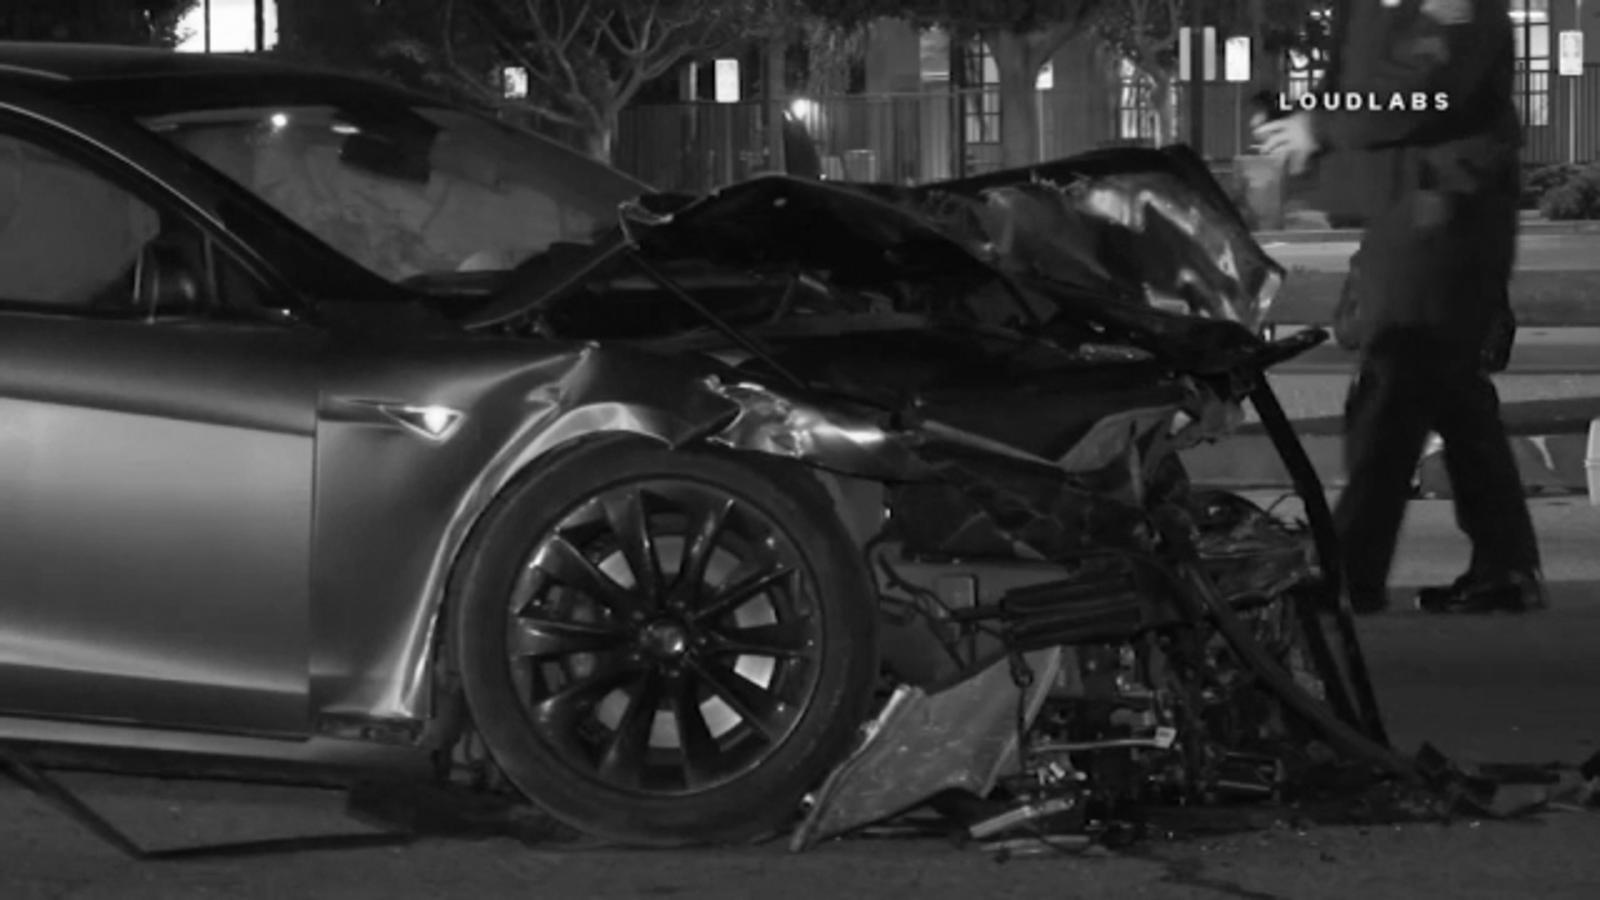 Driver of Tesla on autopilot must stand trial for crash that killed 2 in Gardena, choose guidelines